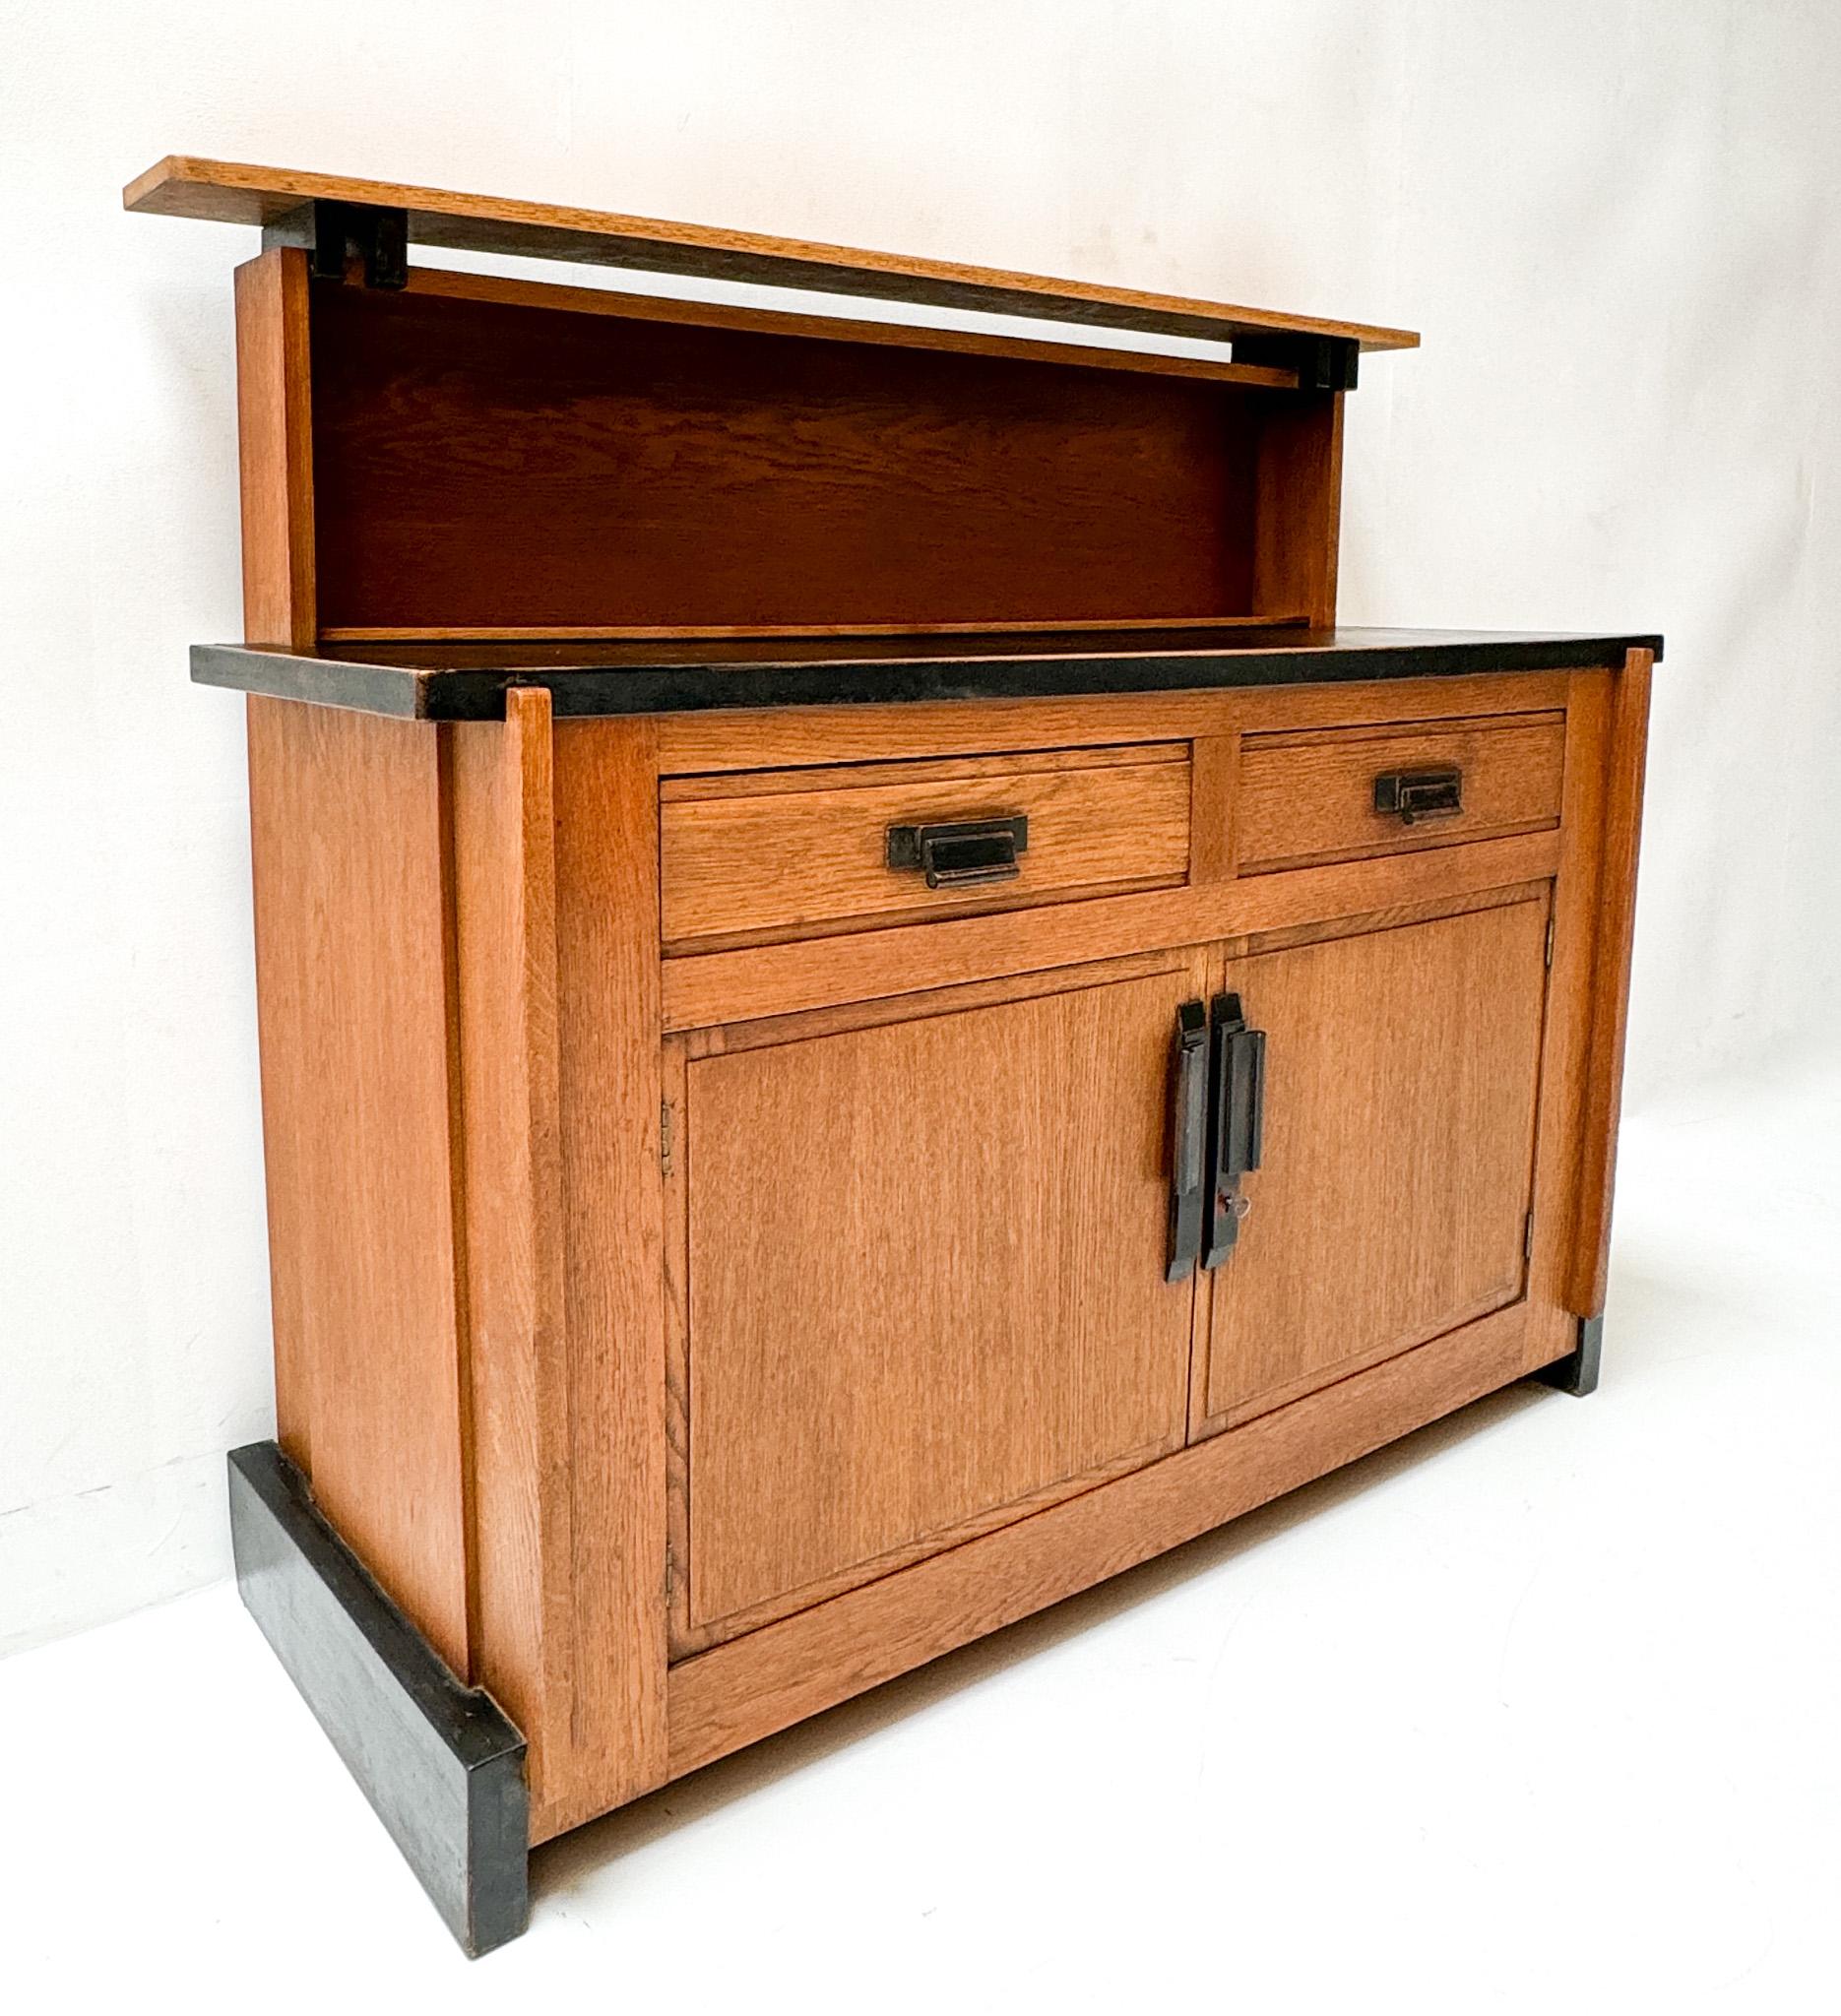 Oak Art Deco Modernist Credenza or Sideboard by Jan Brunott, 1920s In Good Condition For Sale In Amsterdam, NL